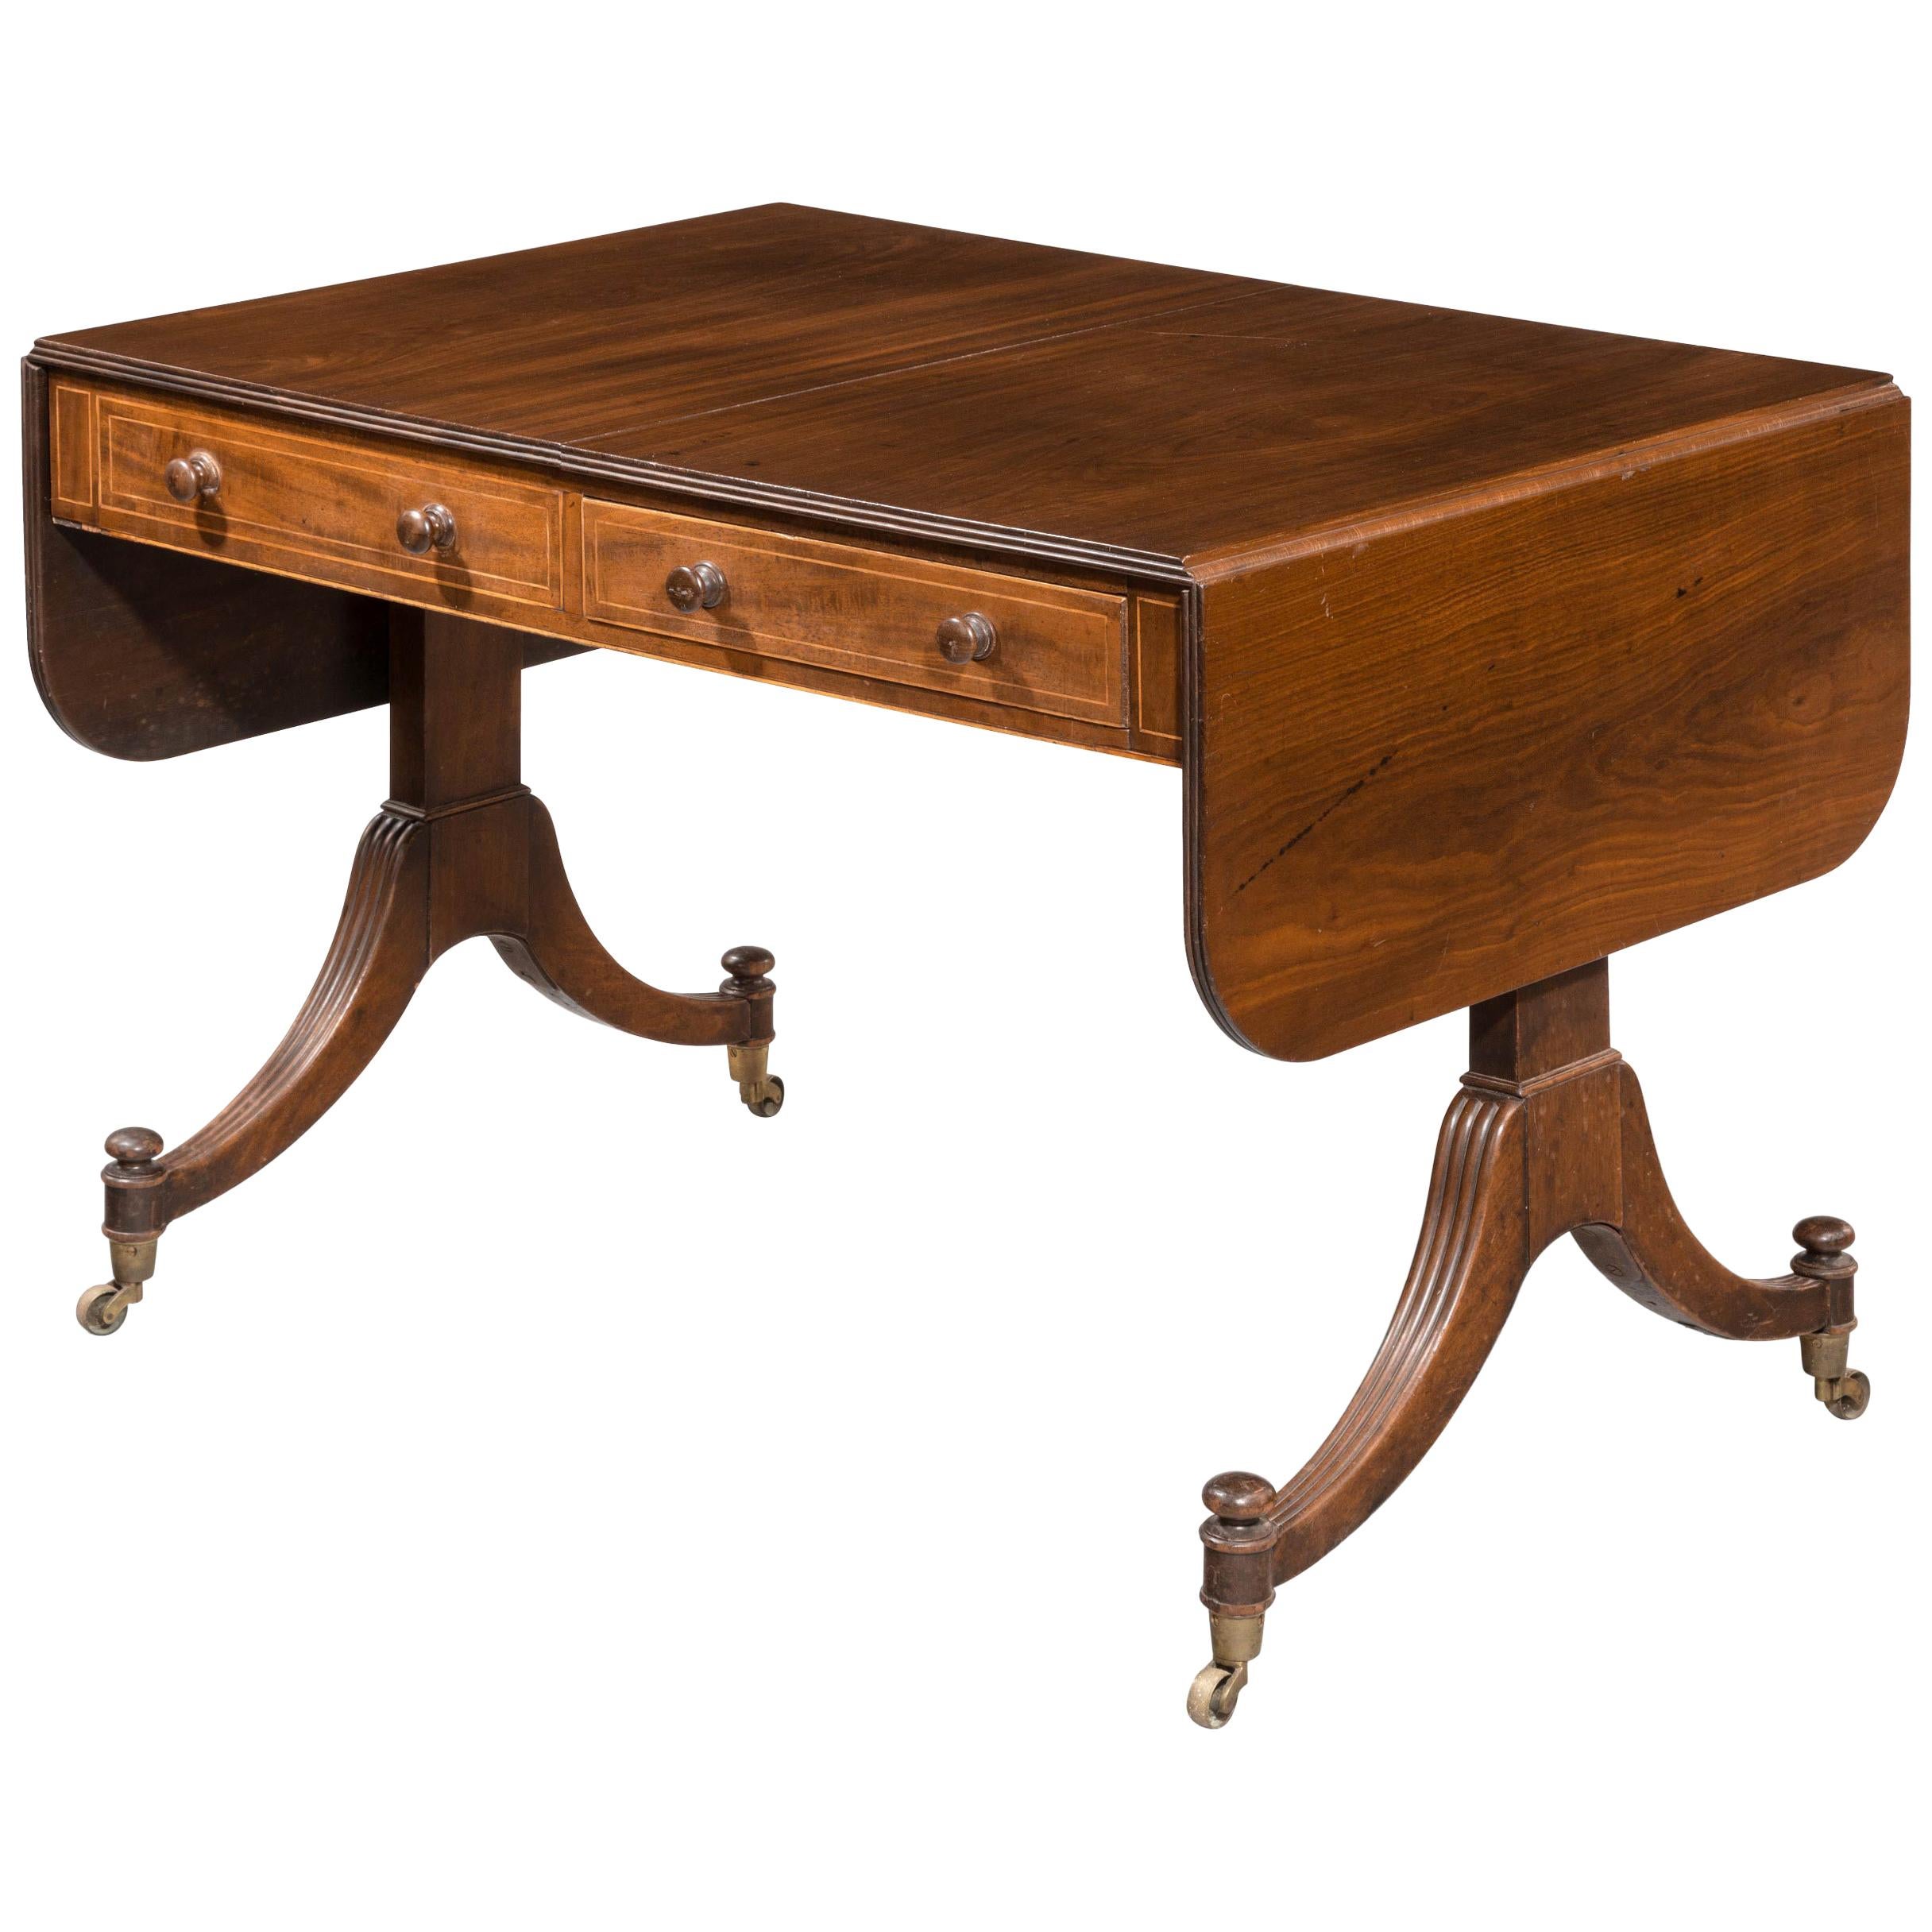 Small, Attractive George III Period Mahogany Side Table on Cabriole Supports